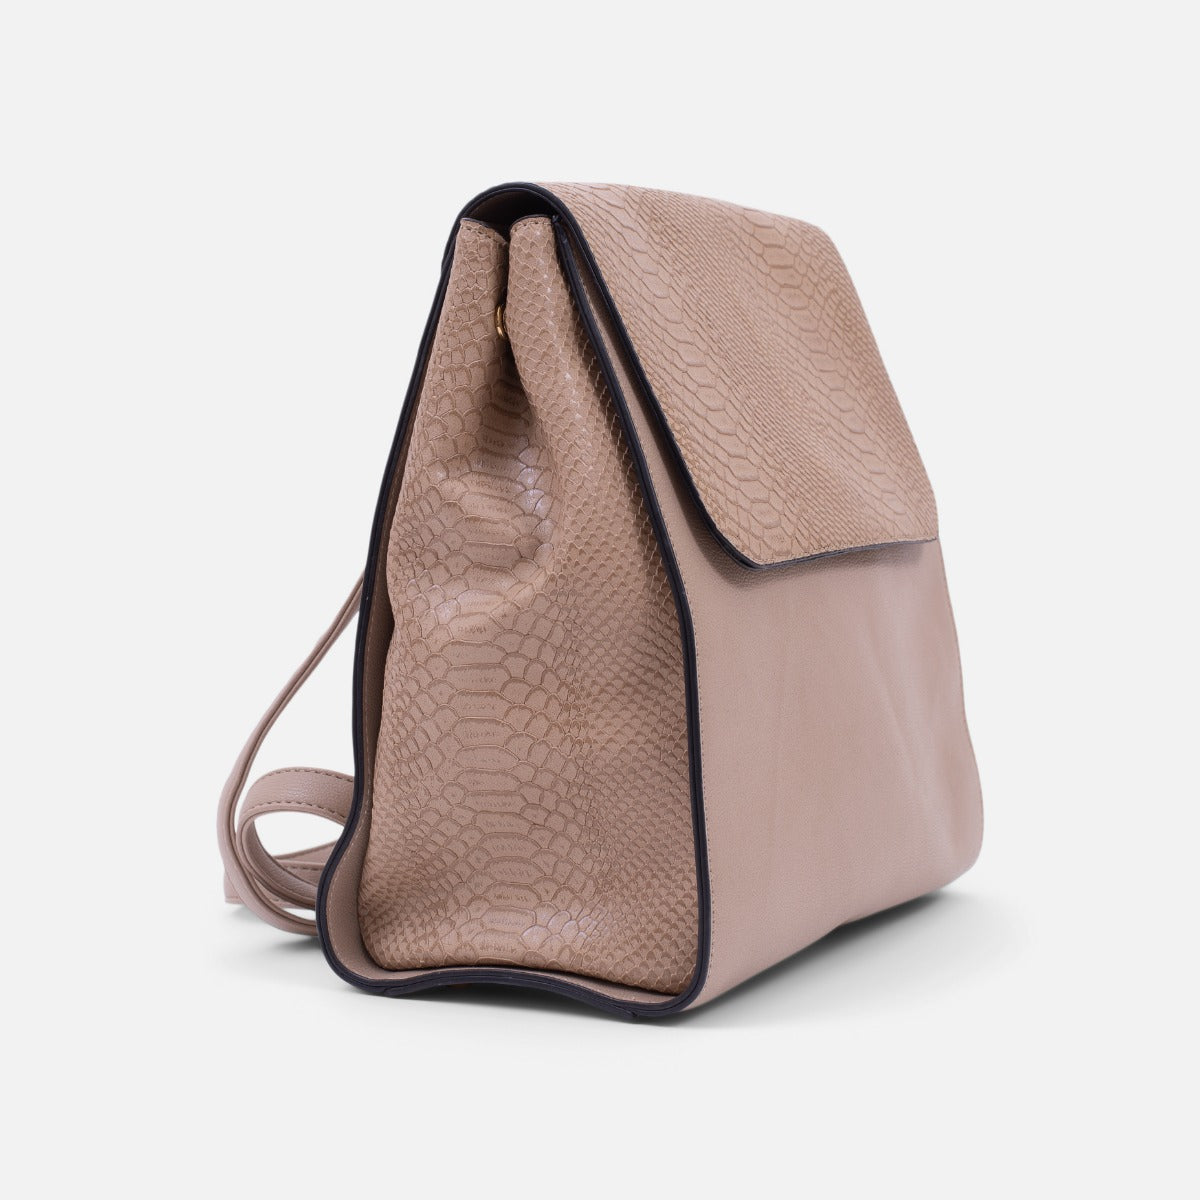 Beige backpack with a flap and snake effect